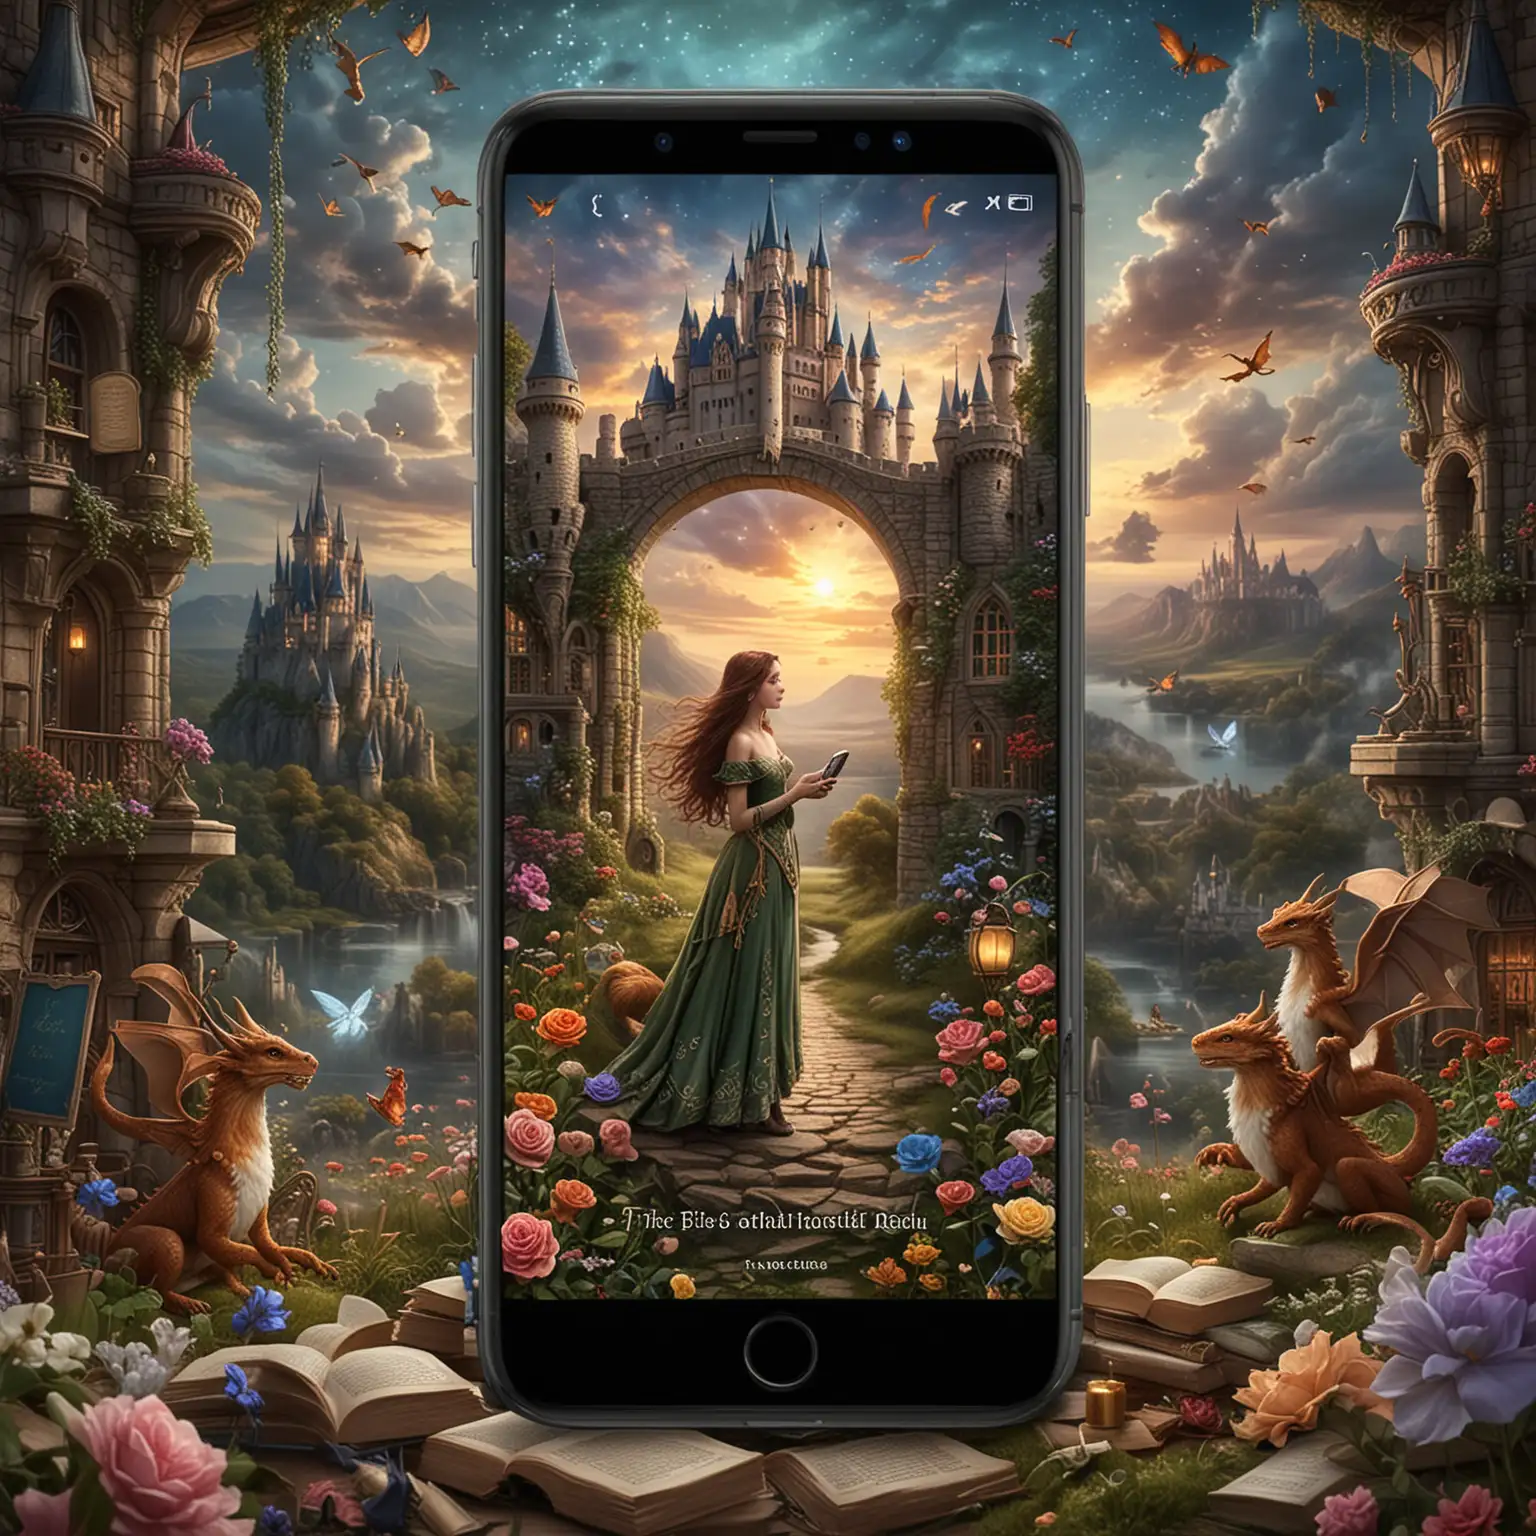 Imagine an image  A beautiful photo of the "Threads" app on your phone. The phone screen displays an image of discovering magical worlds, beautiful magical books from the Victorian era. On the phone is supposed to be only the inscription "Threads," and the phone is surrounded by beautiful magic and fantasy fantasy of the figure of only one beautiful dragon, beautiful only one magical elf and various beautiful magical creatures from myths, legends, fairy tales. In the background a magical beautiful castle. The magic of fantasy.